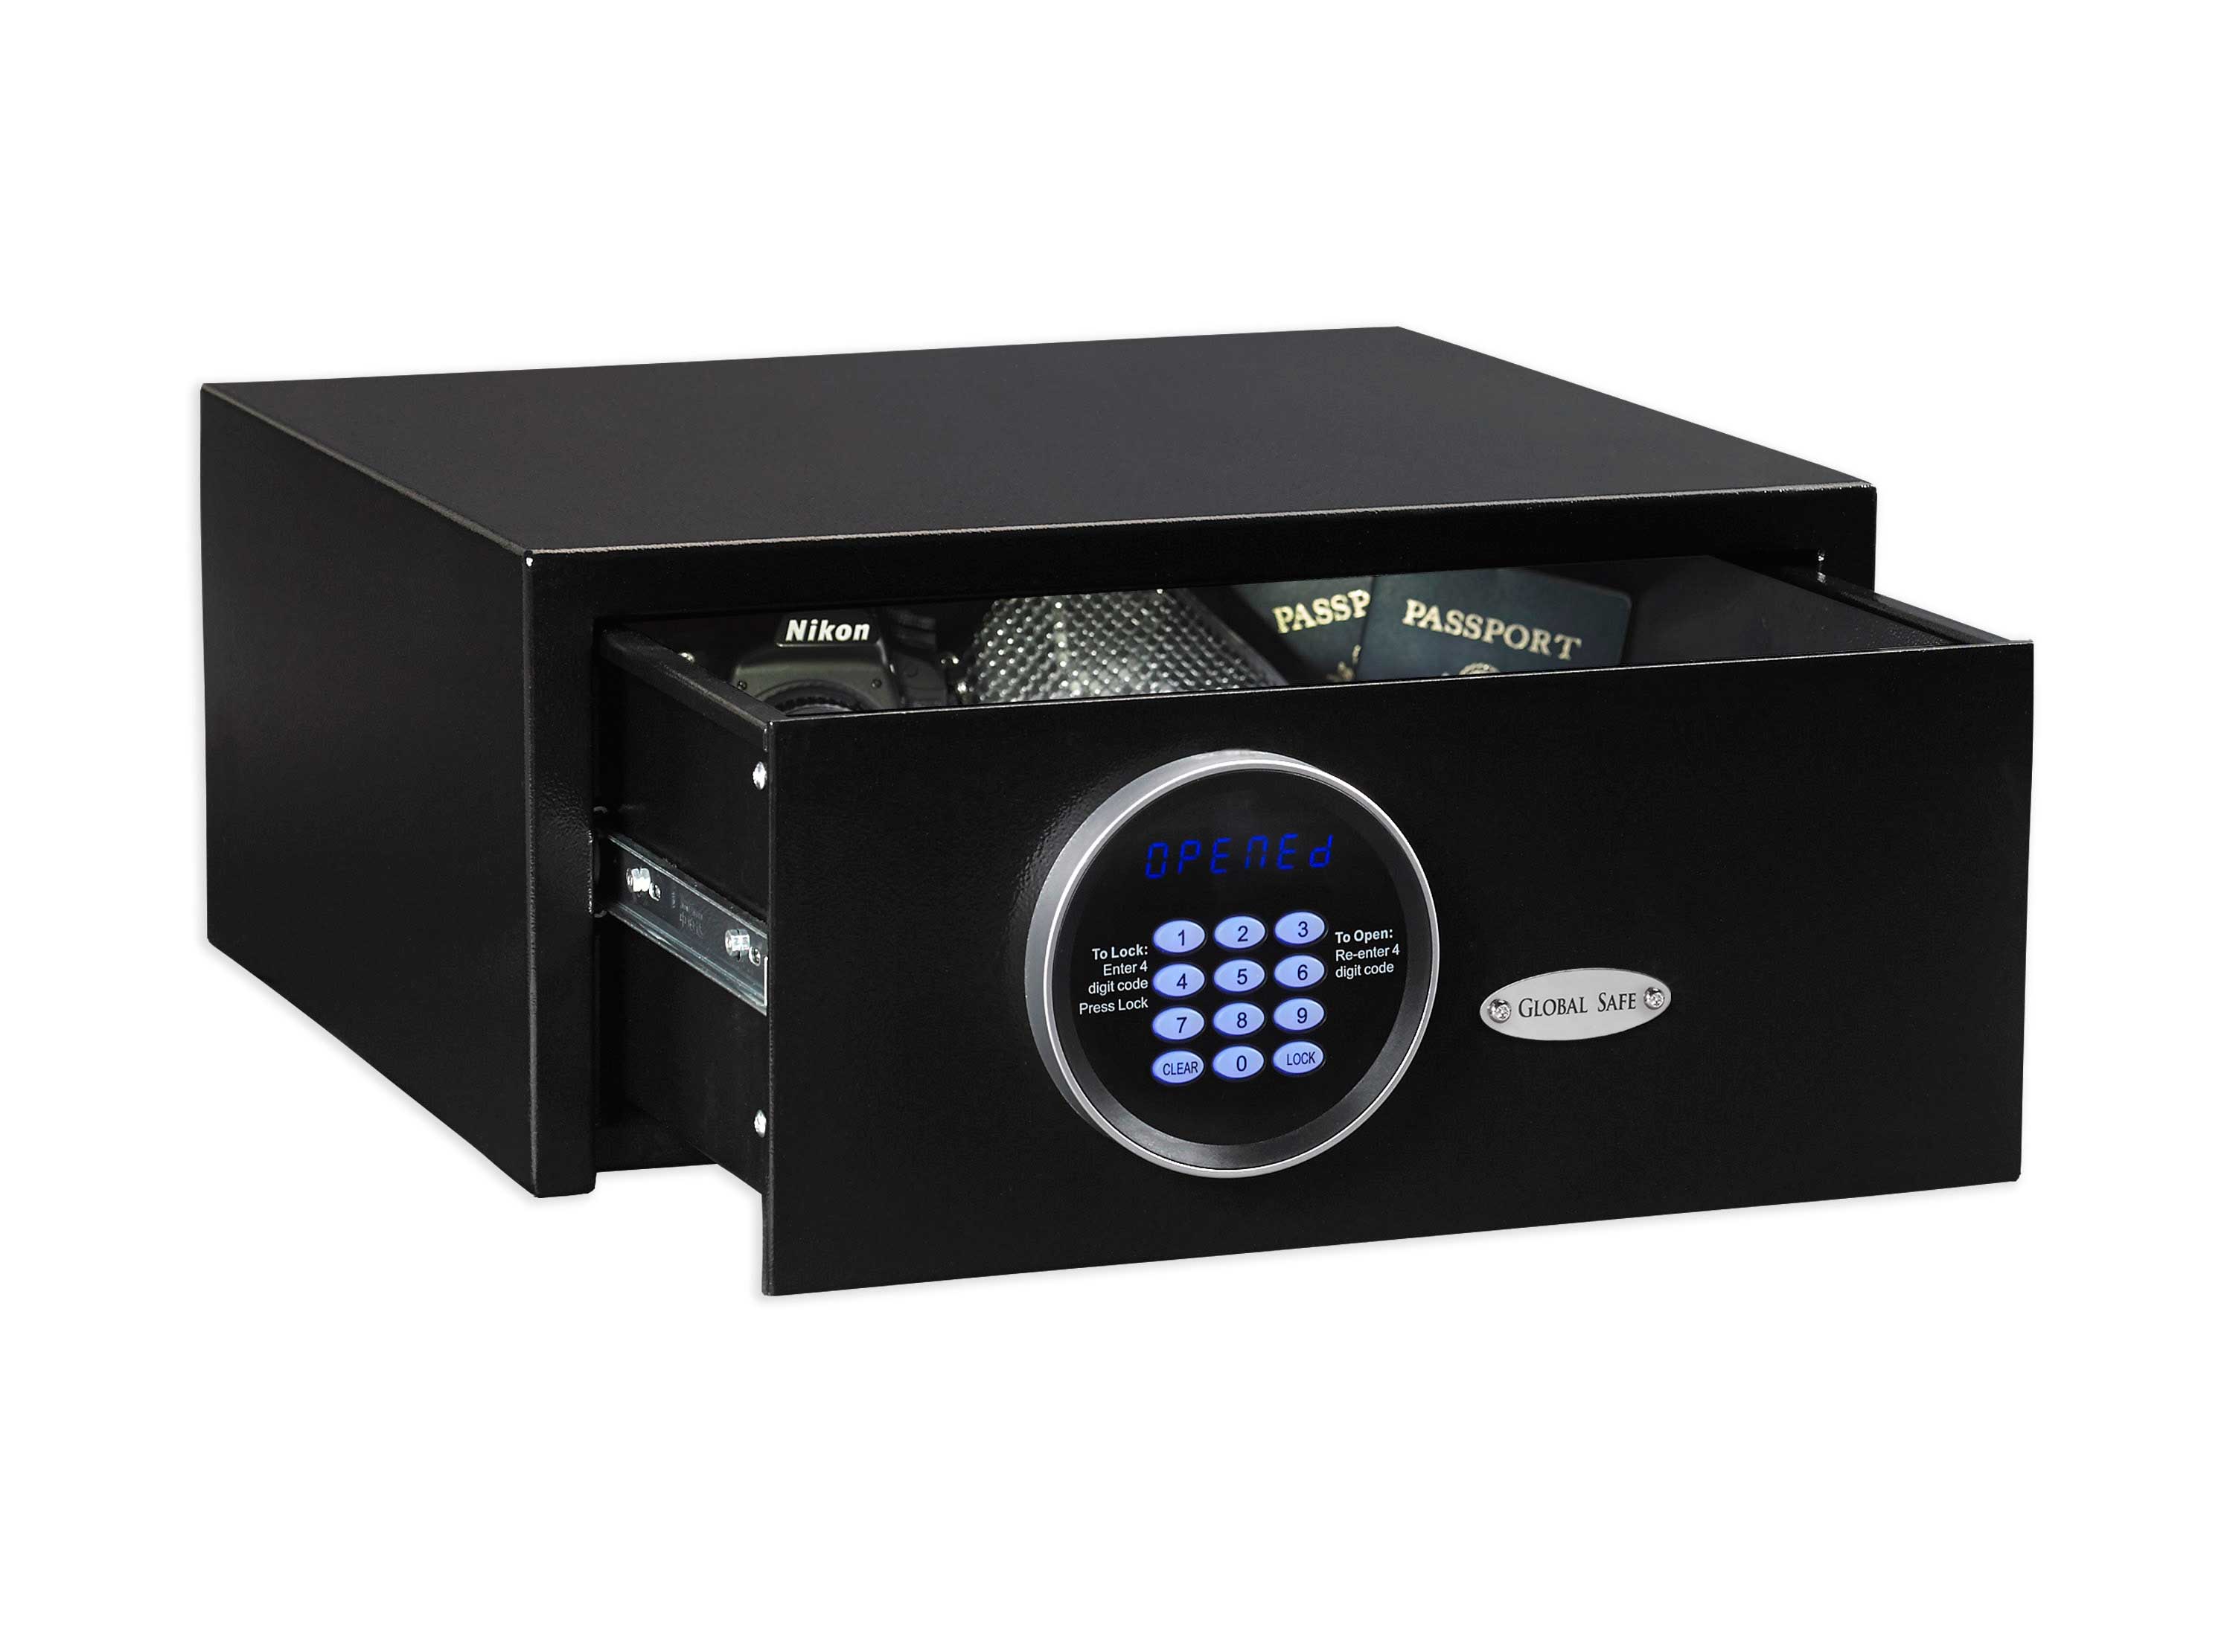 sfw205upc sentry safe open with key